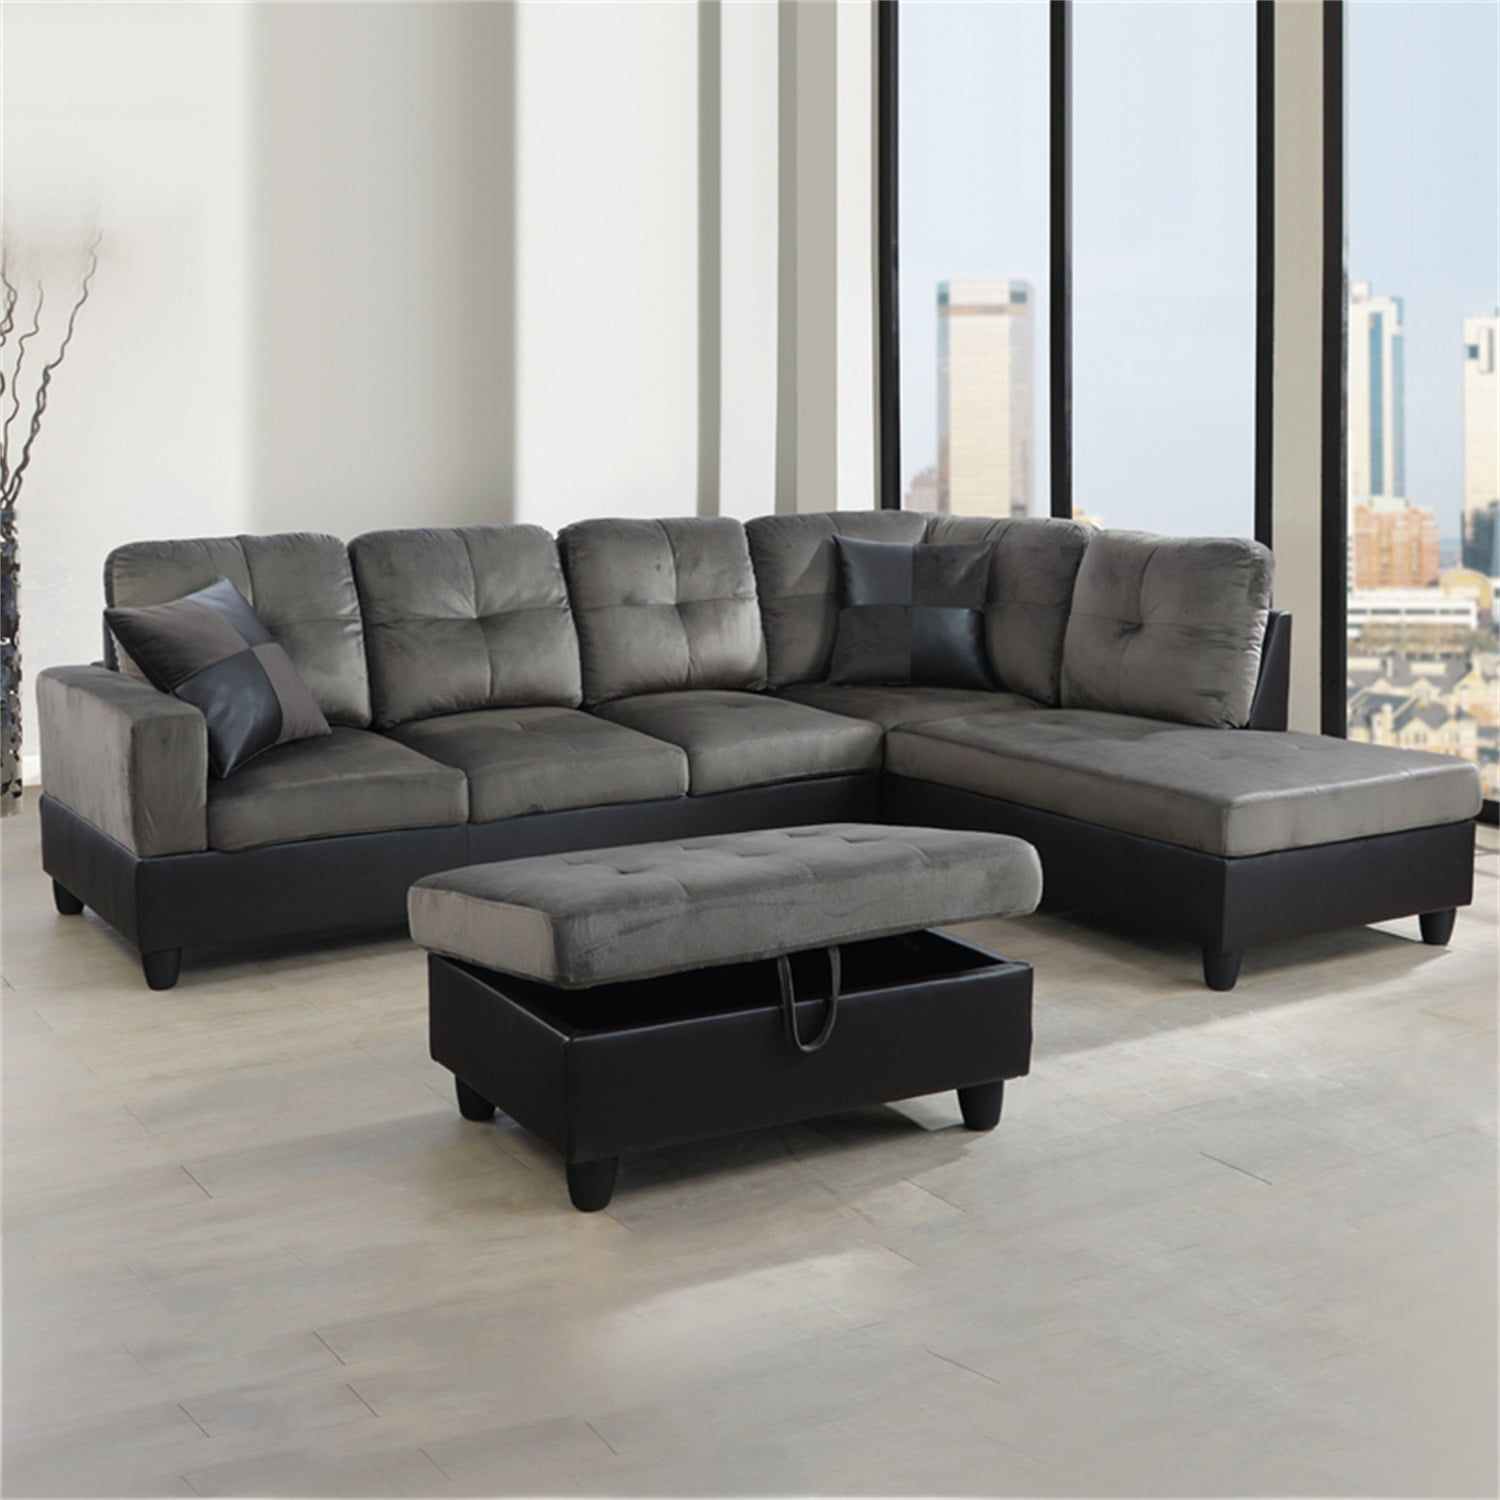 Hommoo Sectional Sofa, Free Combination Sectional Couch, Small L Shaped Sectional  Sofa, Modern Sofa Set For Living Room, Taupe(Without Ottoman) – Walmart With Regard To Free Combination Sectional Couches (View 2 of 15)